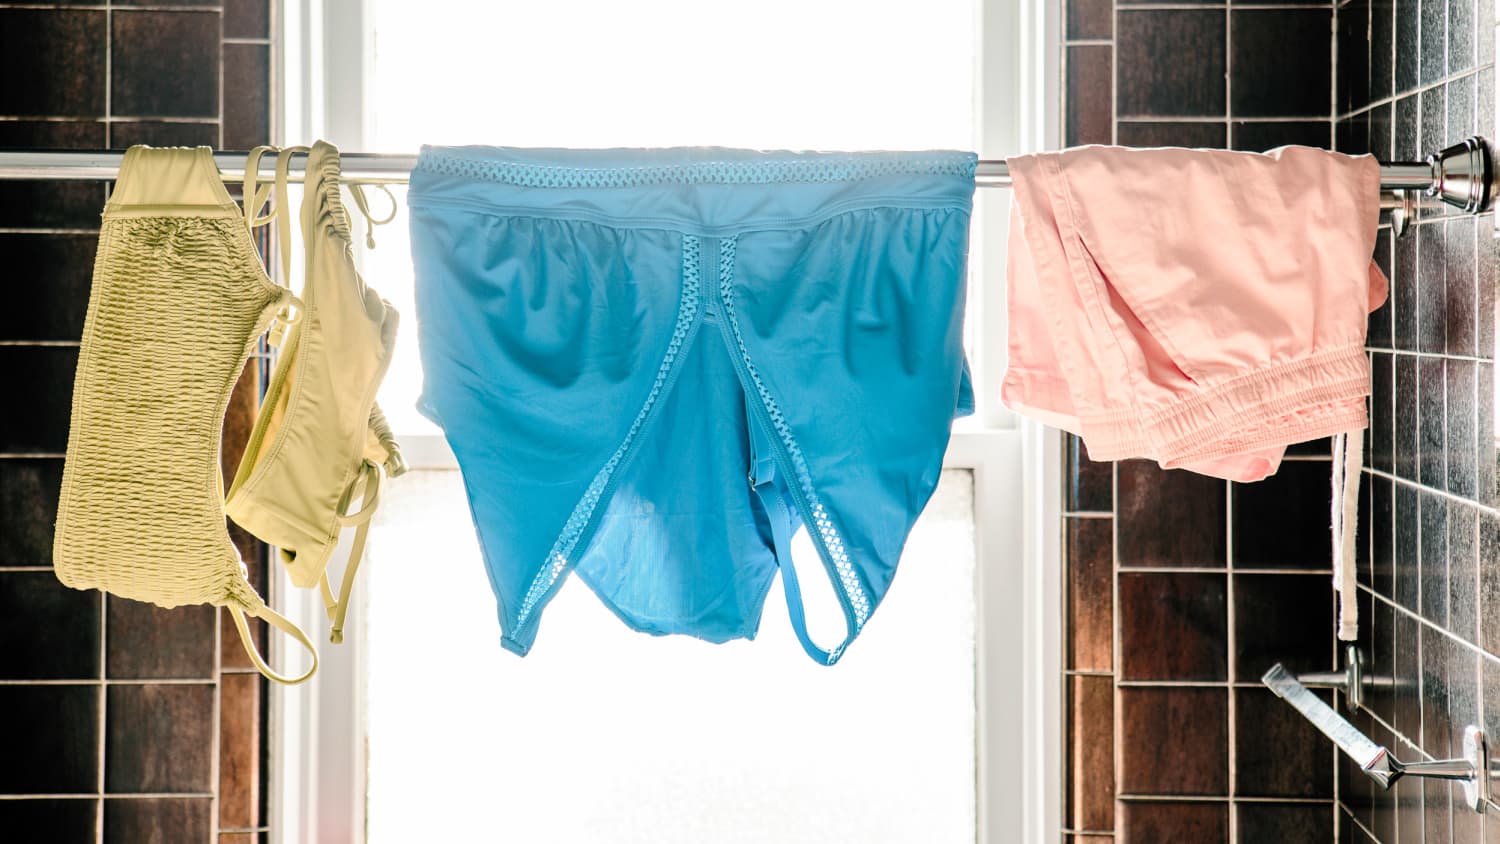 How to Hygienically Wash Swimwear on Vacation (Even in a Hotel!)